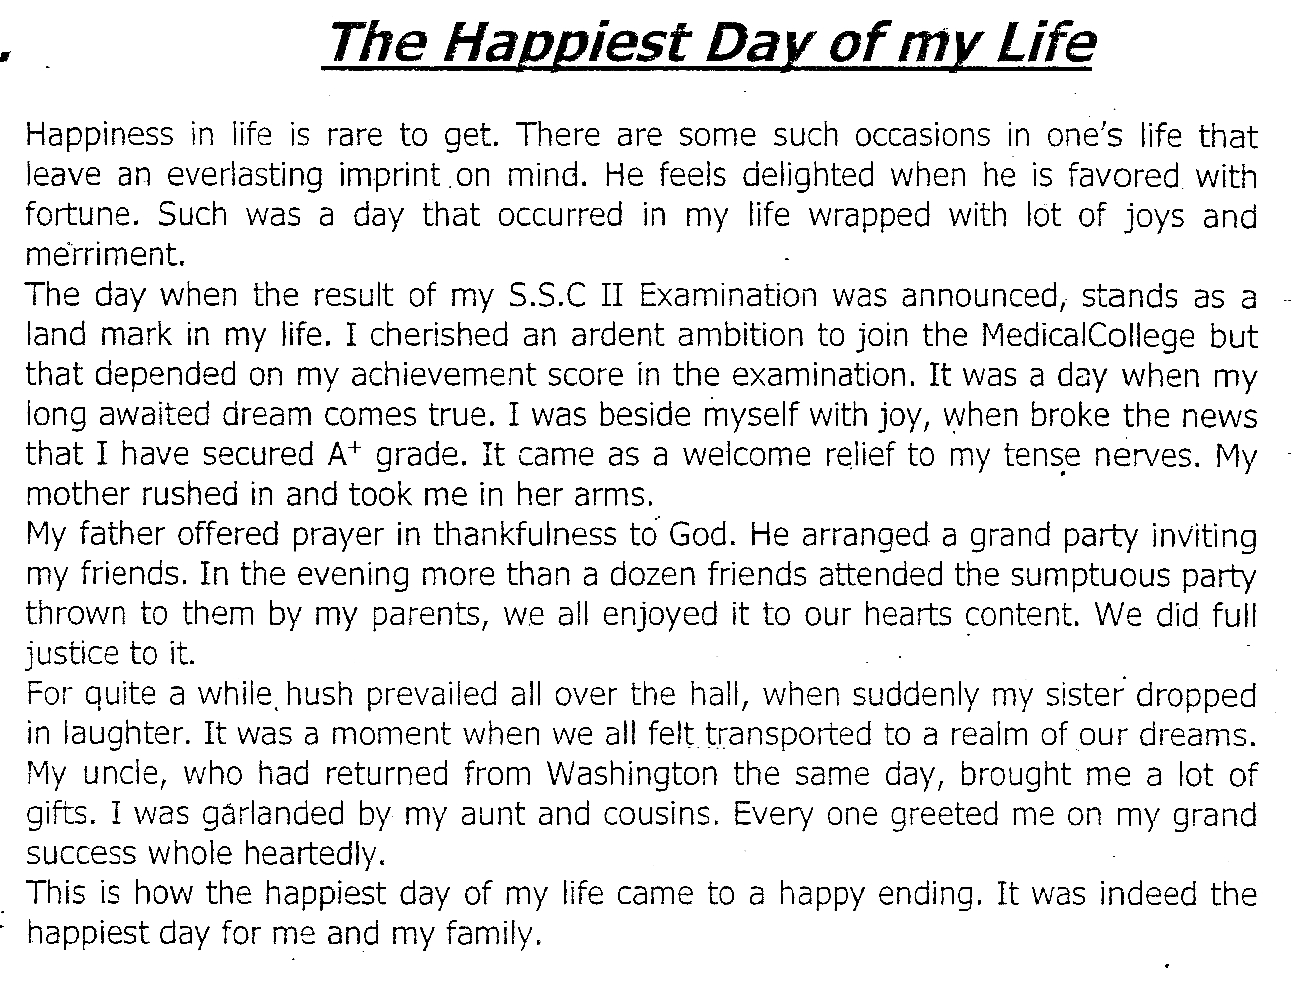 the happiest day of my life essay 200 words